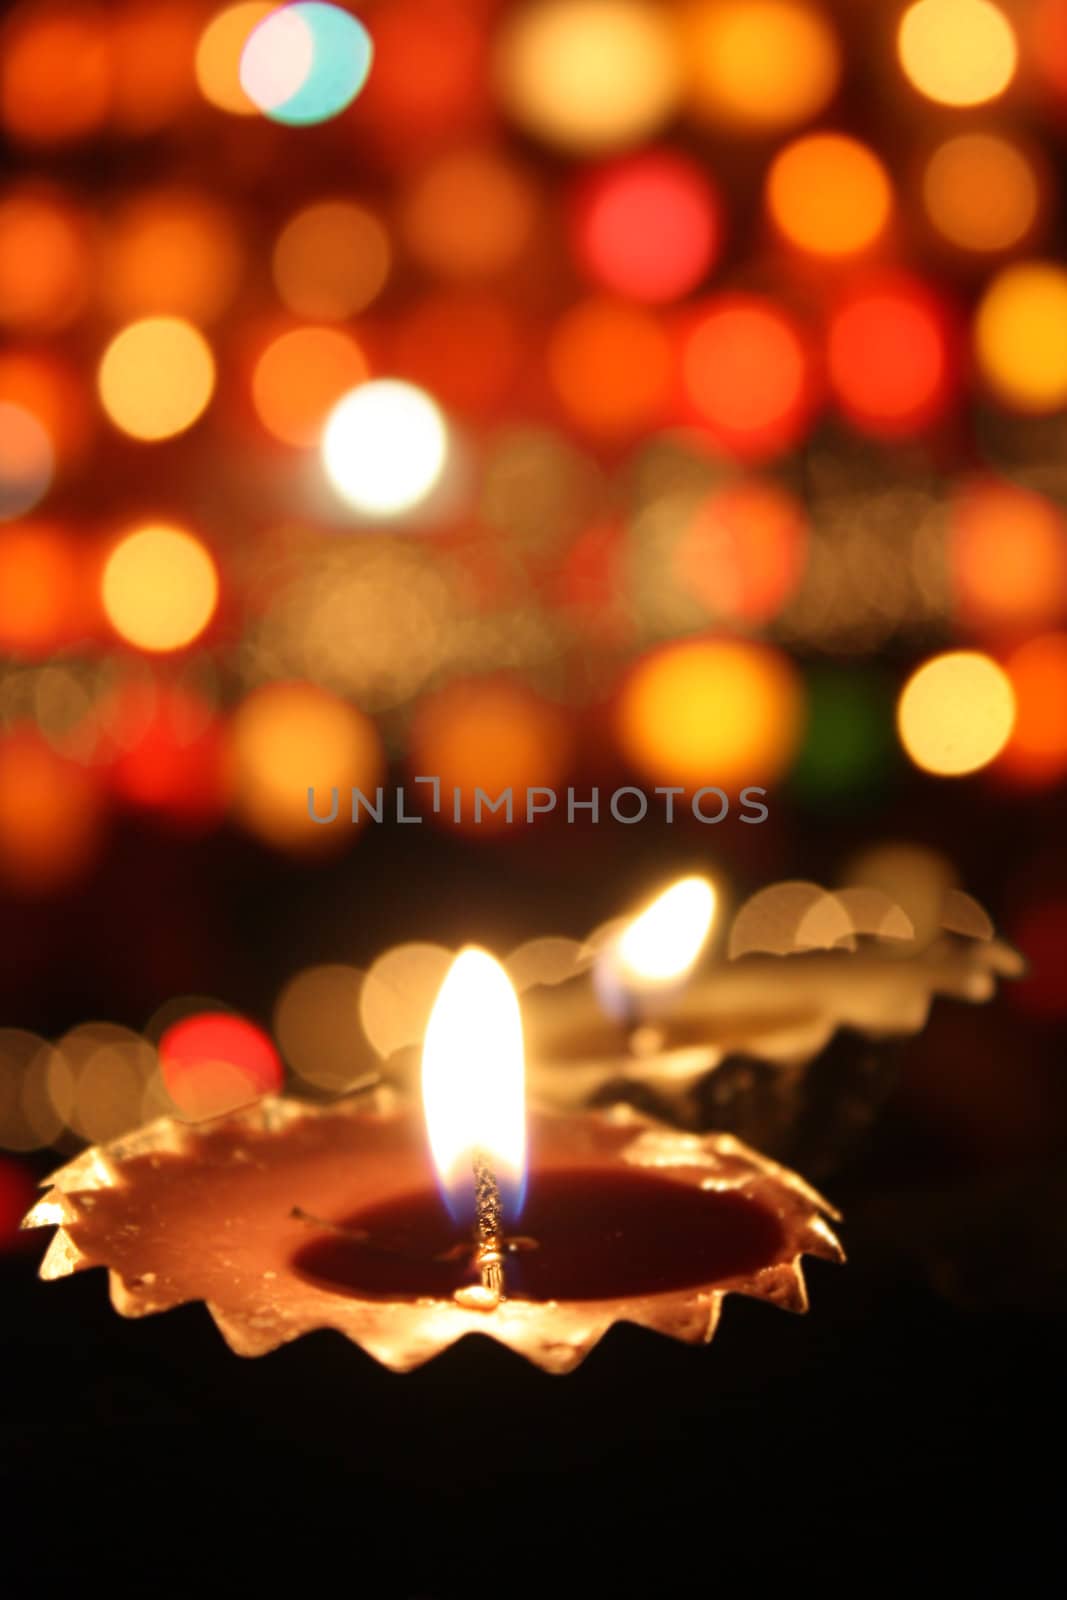 Traditional lamp lit on the blur of colorful lights on the festive occassion of Diwali often known as 'The Festival of Lights'.